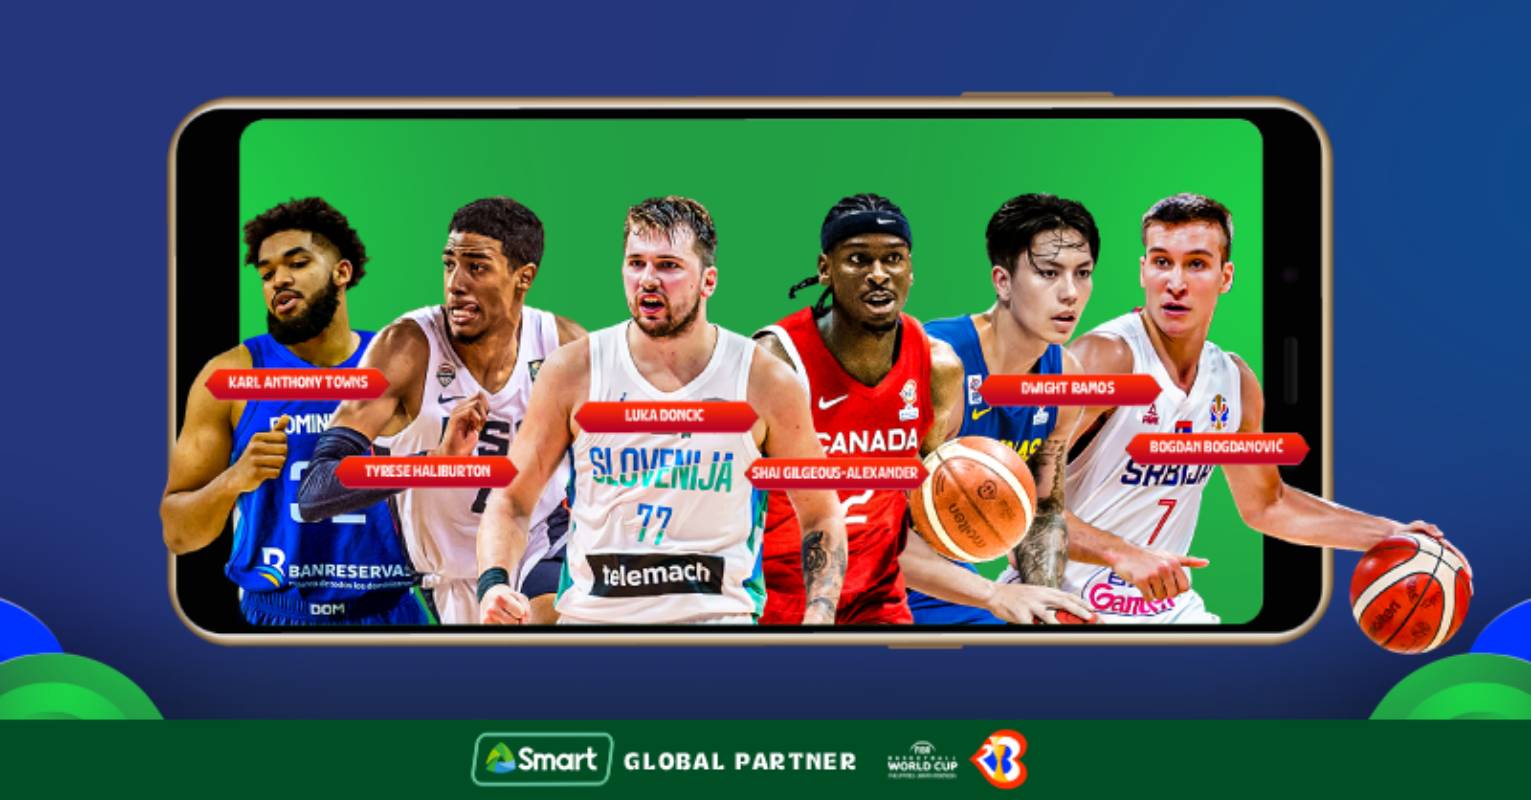 Smart offers free livestream access to FIBA WC for subscribers